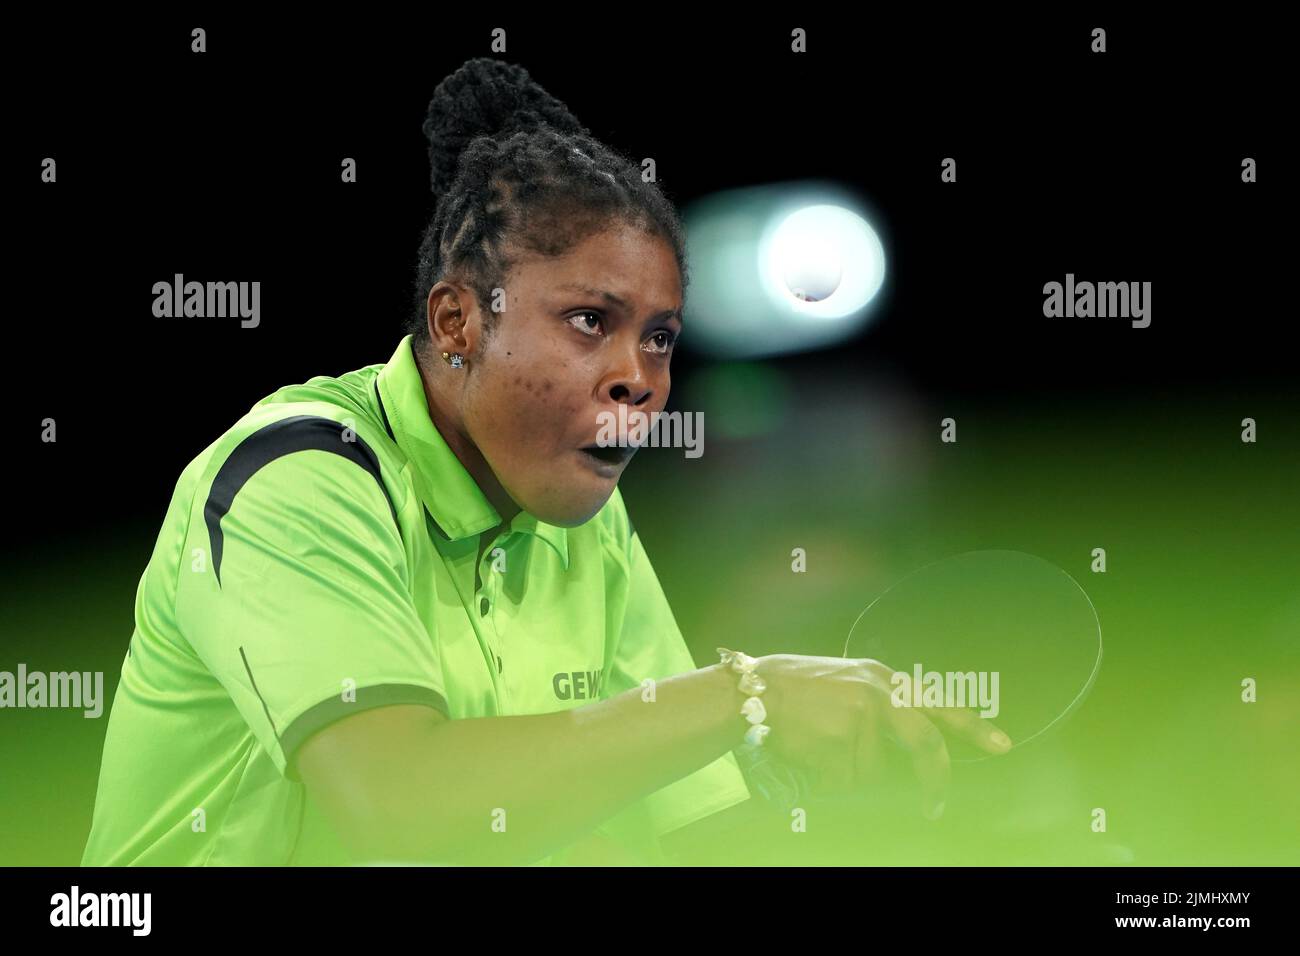 Nigeria's Faith Obazuaye in action against England 's Felicity Pickard during the Table Tennis Women's Singles Classes 6-10 - Bronze Medal Matchat The NEC on day nine of the 2022 Commonwealth Games in Birmingham. Picture date: Saturday August 6, 2022. Stock Photo